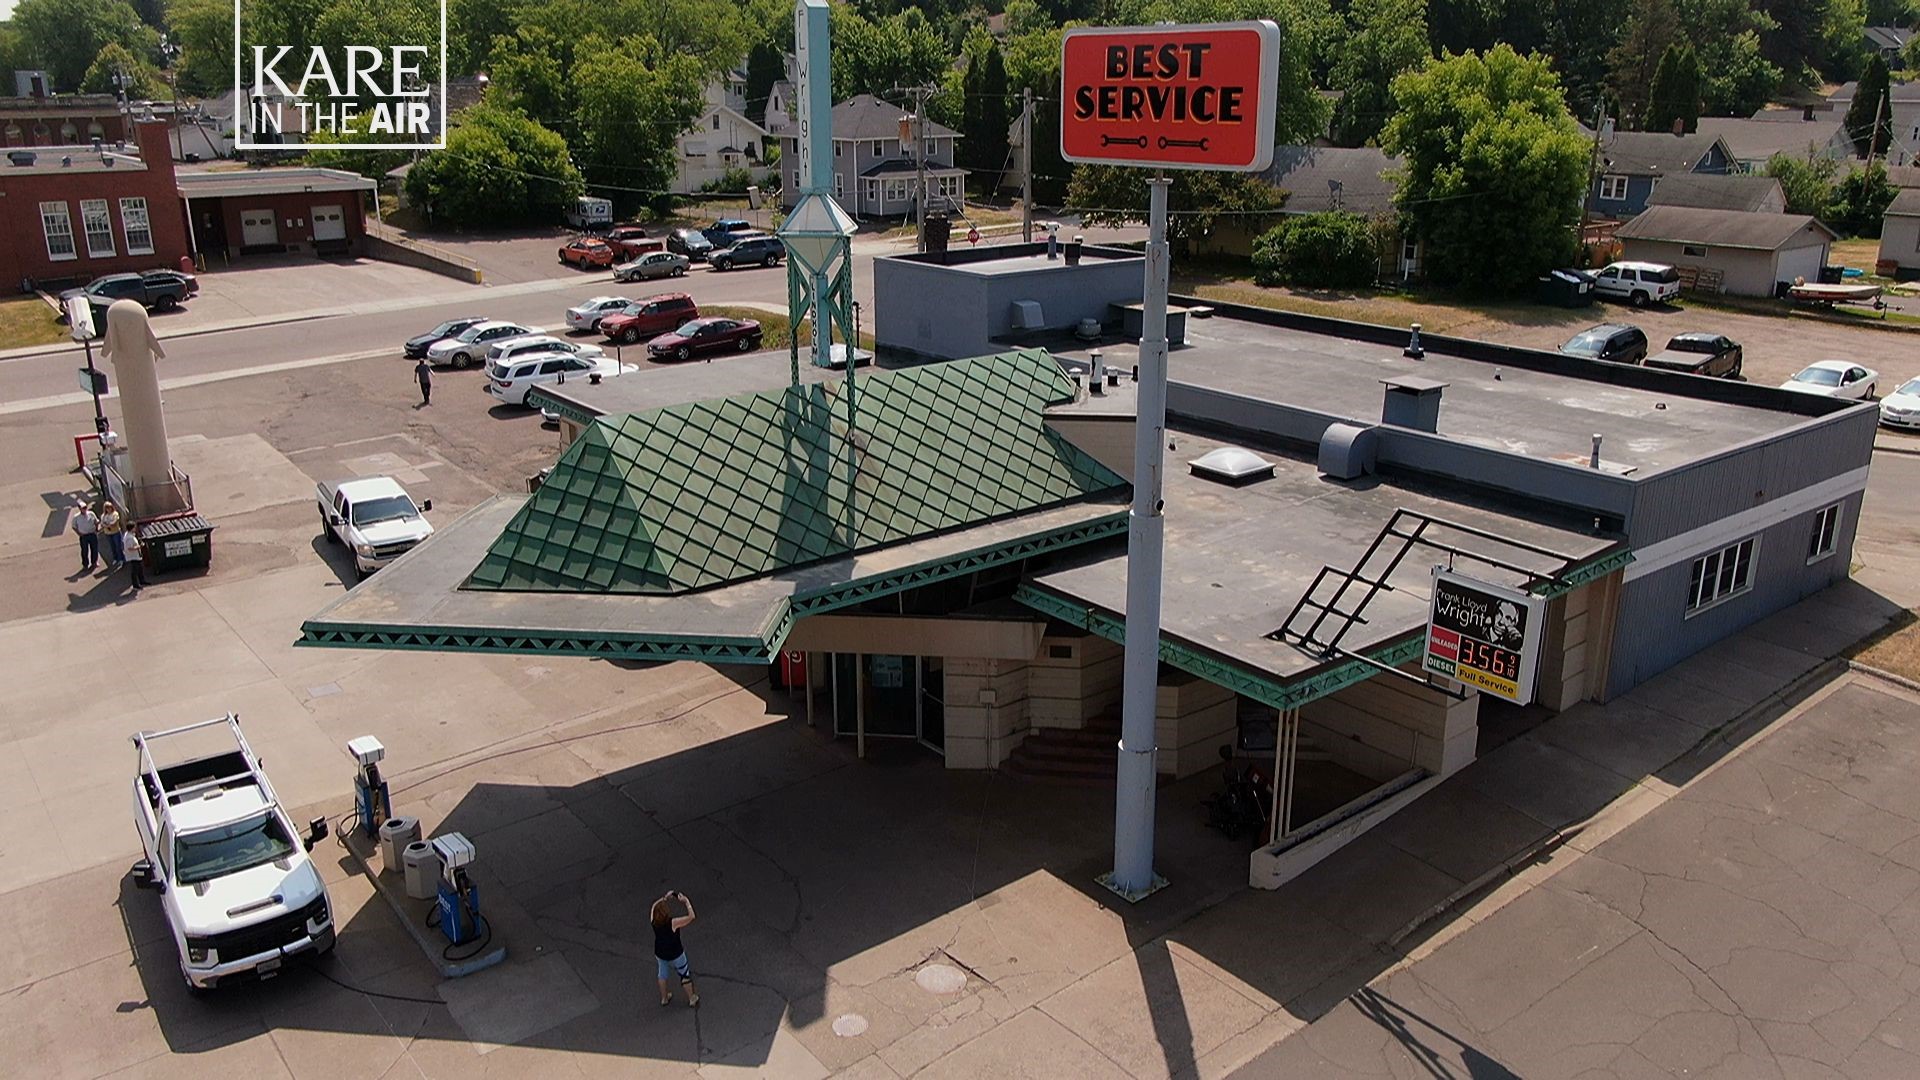 Our drone series takes us to Cloquet, where the esteemed architect put his talents to use designing a fill-up spot with flair.